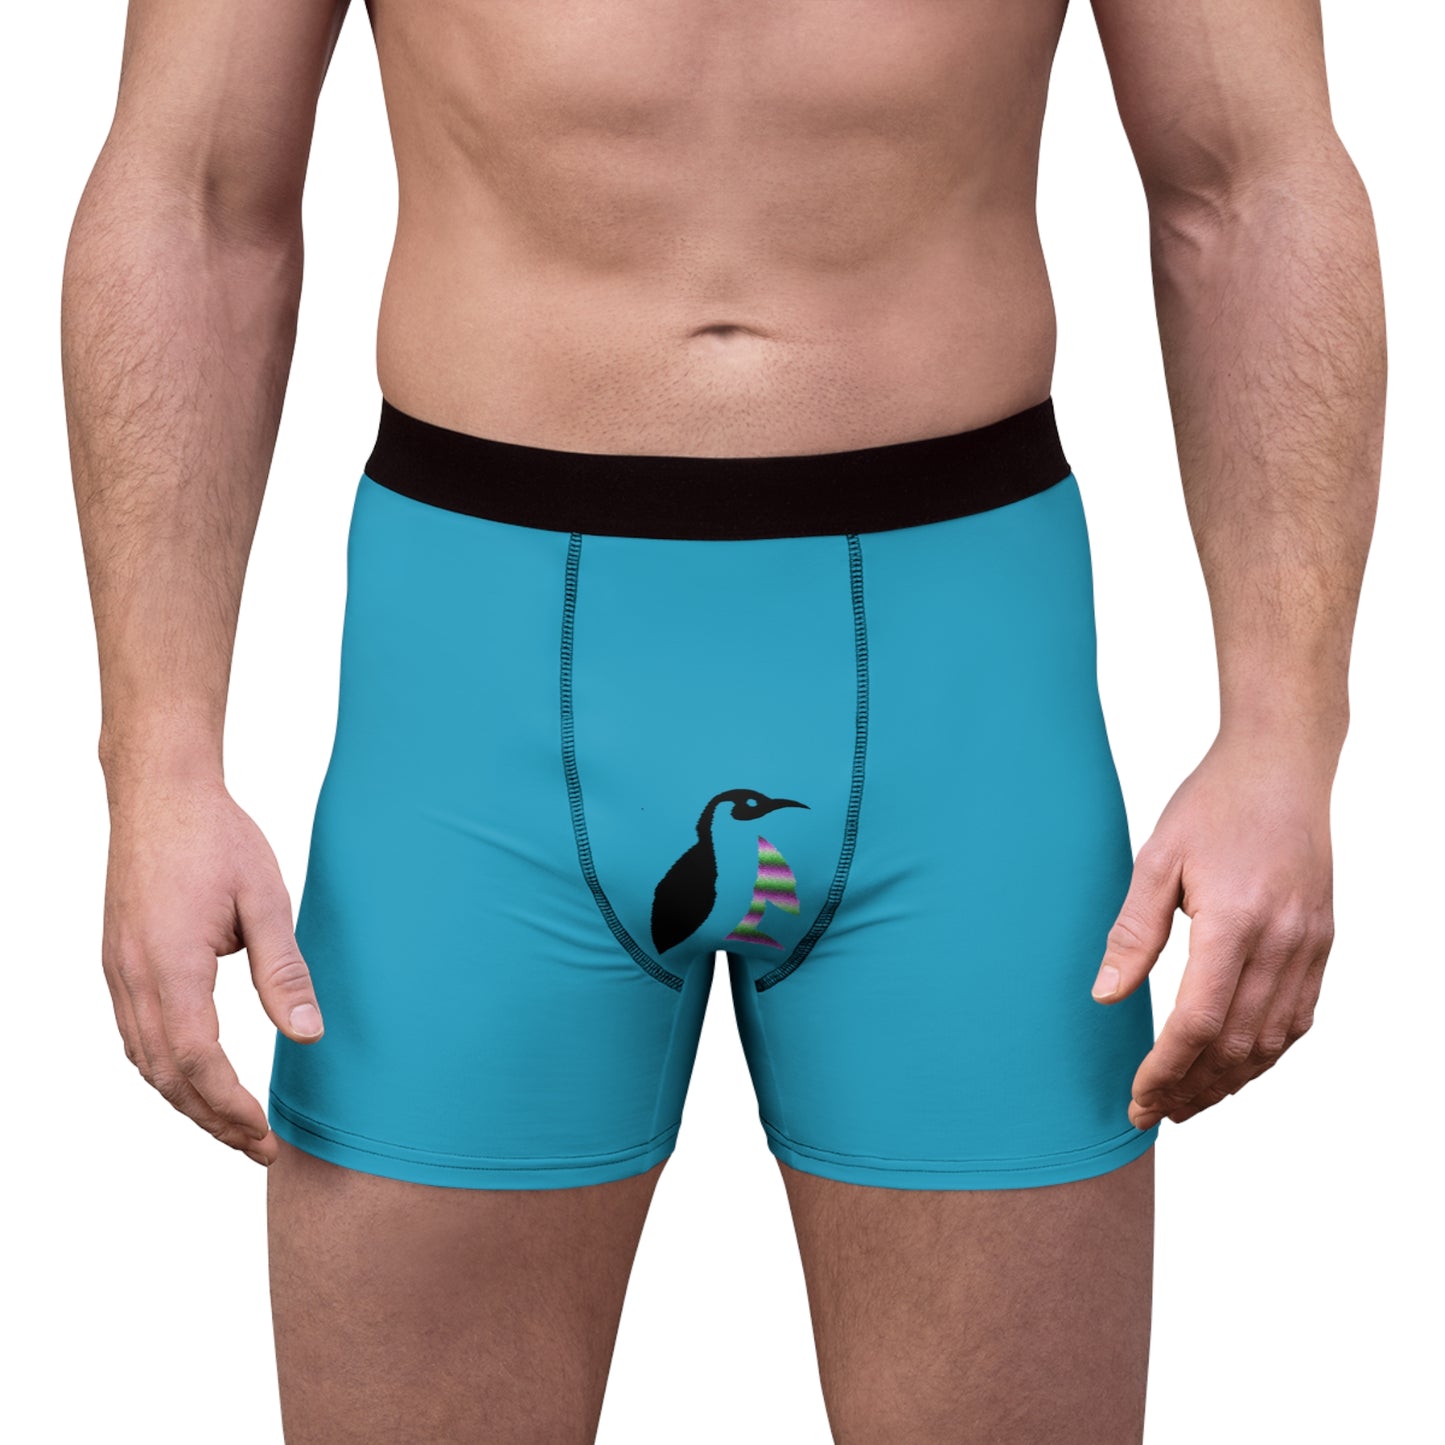 Men's Boxer Briefs: Lost Remember Honor Turquoise